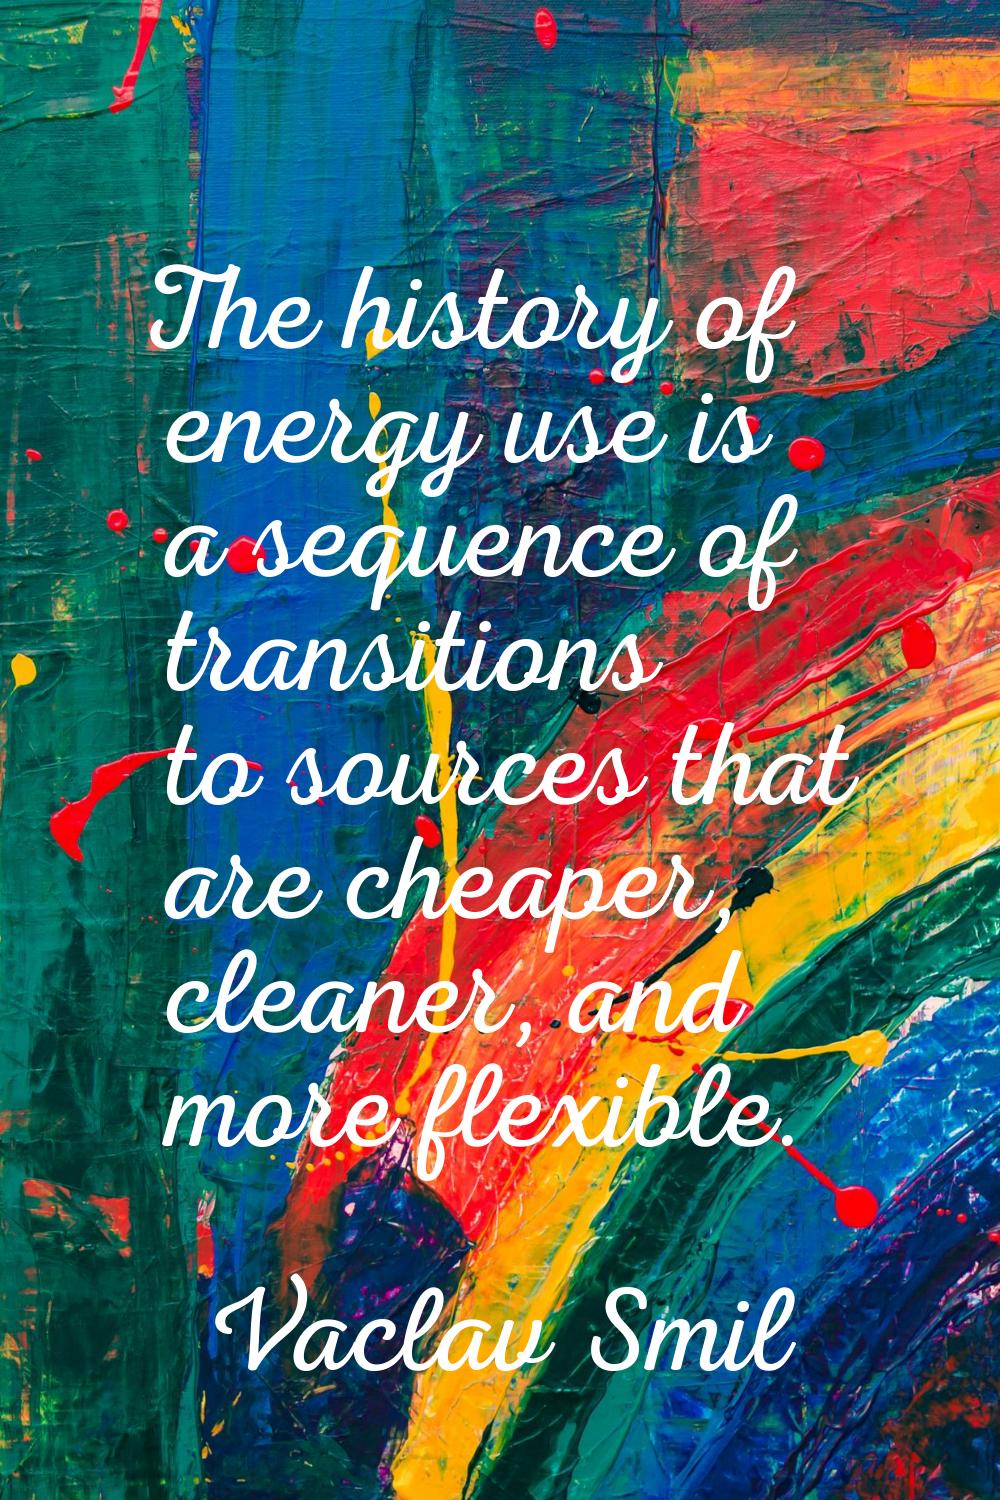 The history of energy use is a sequence of transitions to sources that are cheaper, cleaner, and mo